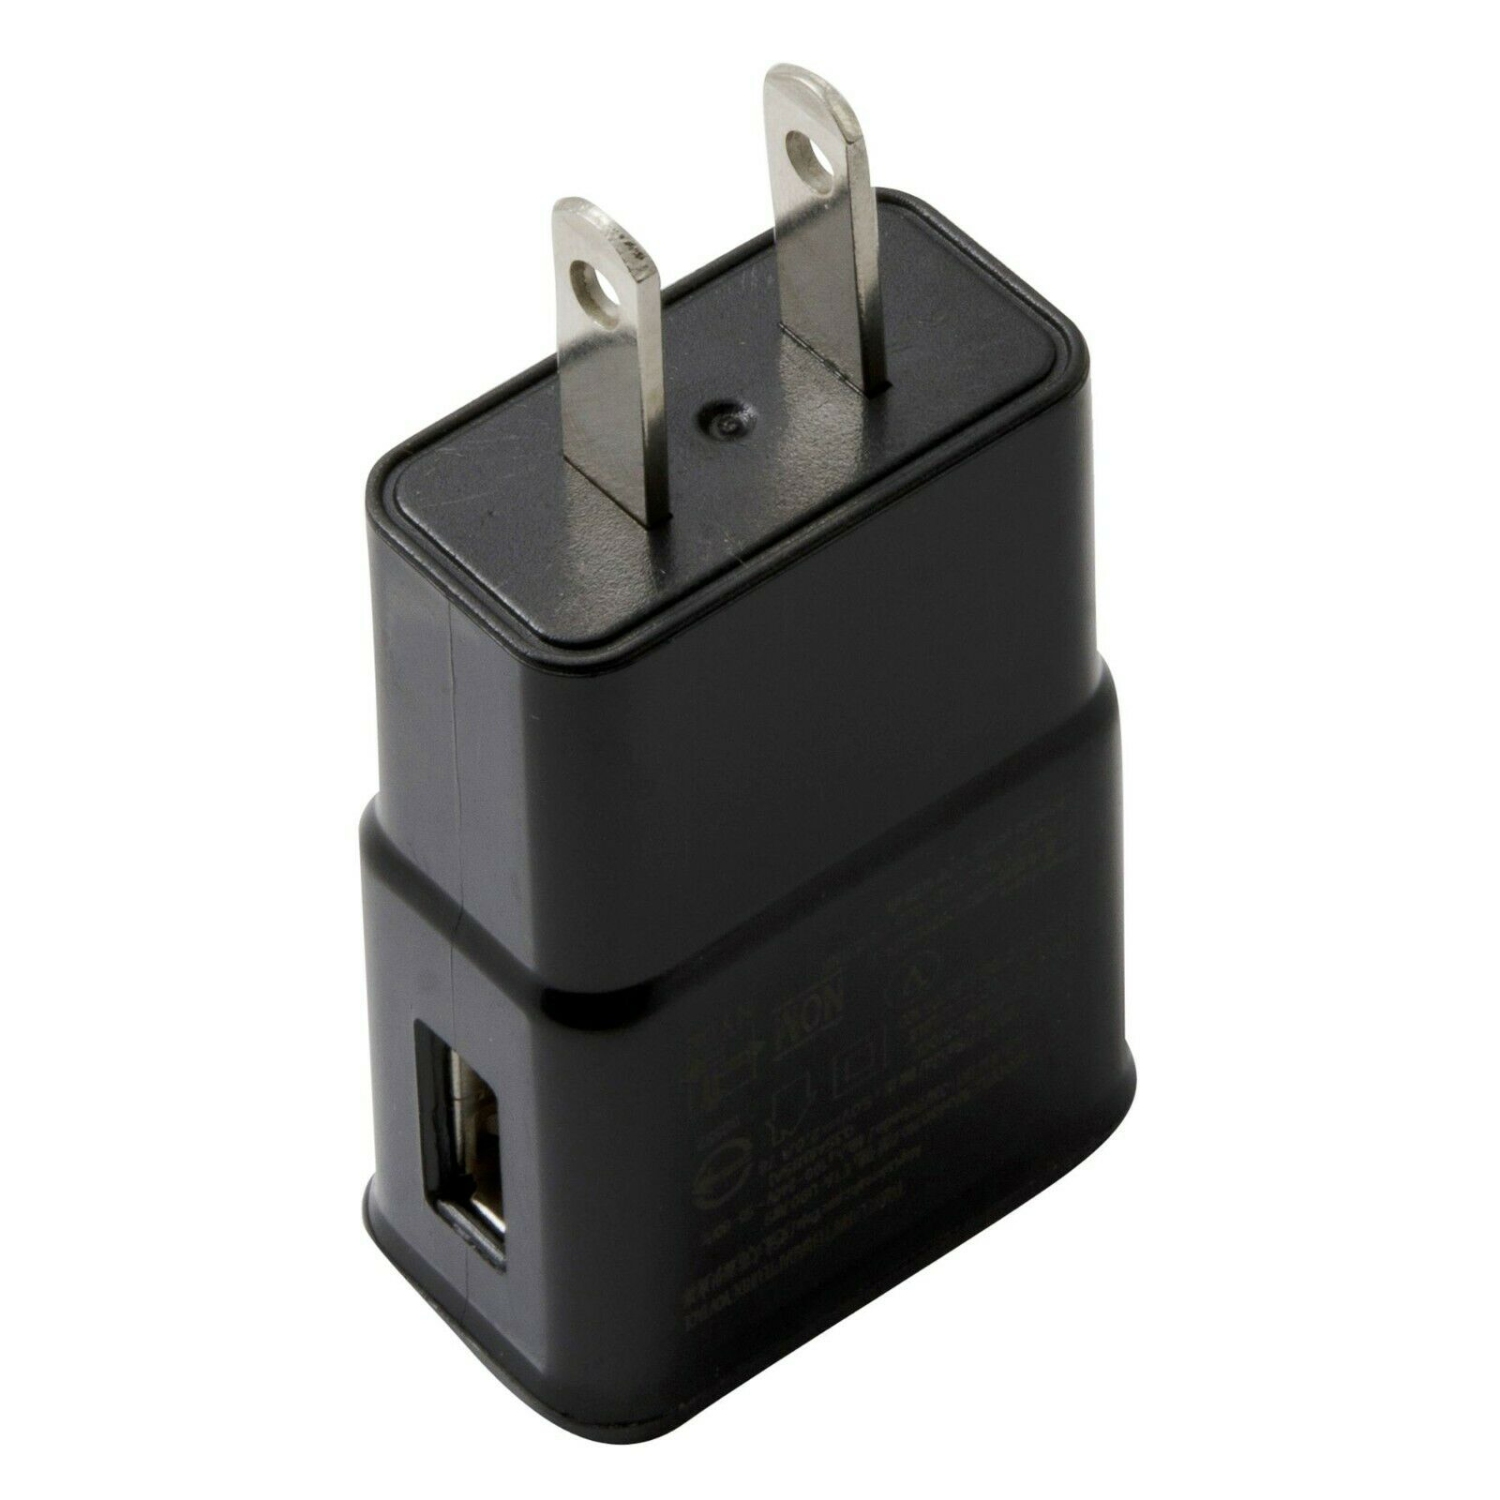 5V 2A 1/2/3-Port USB Wall Adapter Charger US Plug For Samsung iPhone LG HTC (Black)